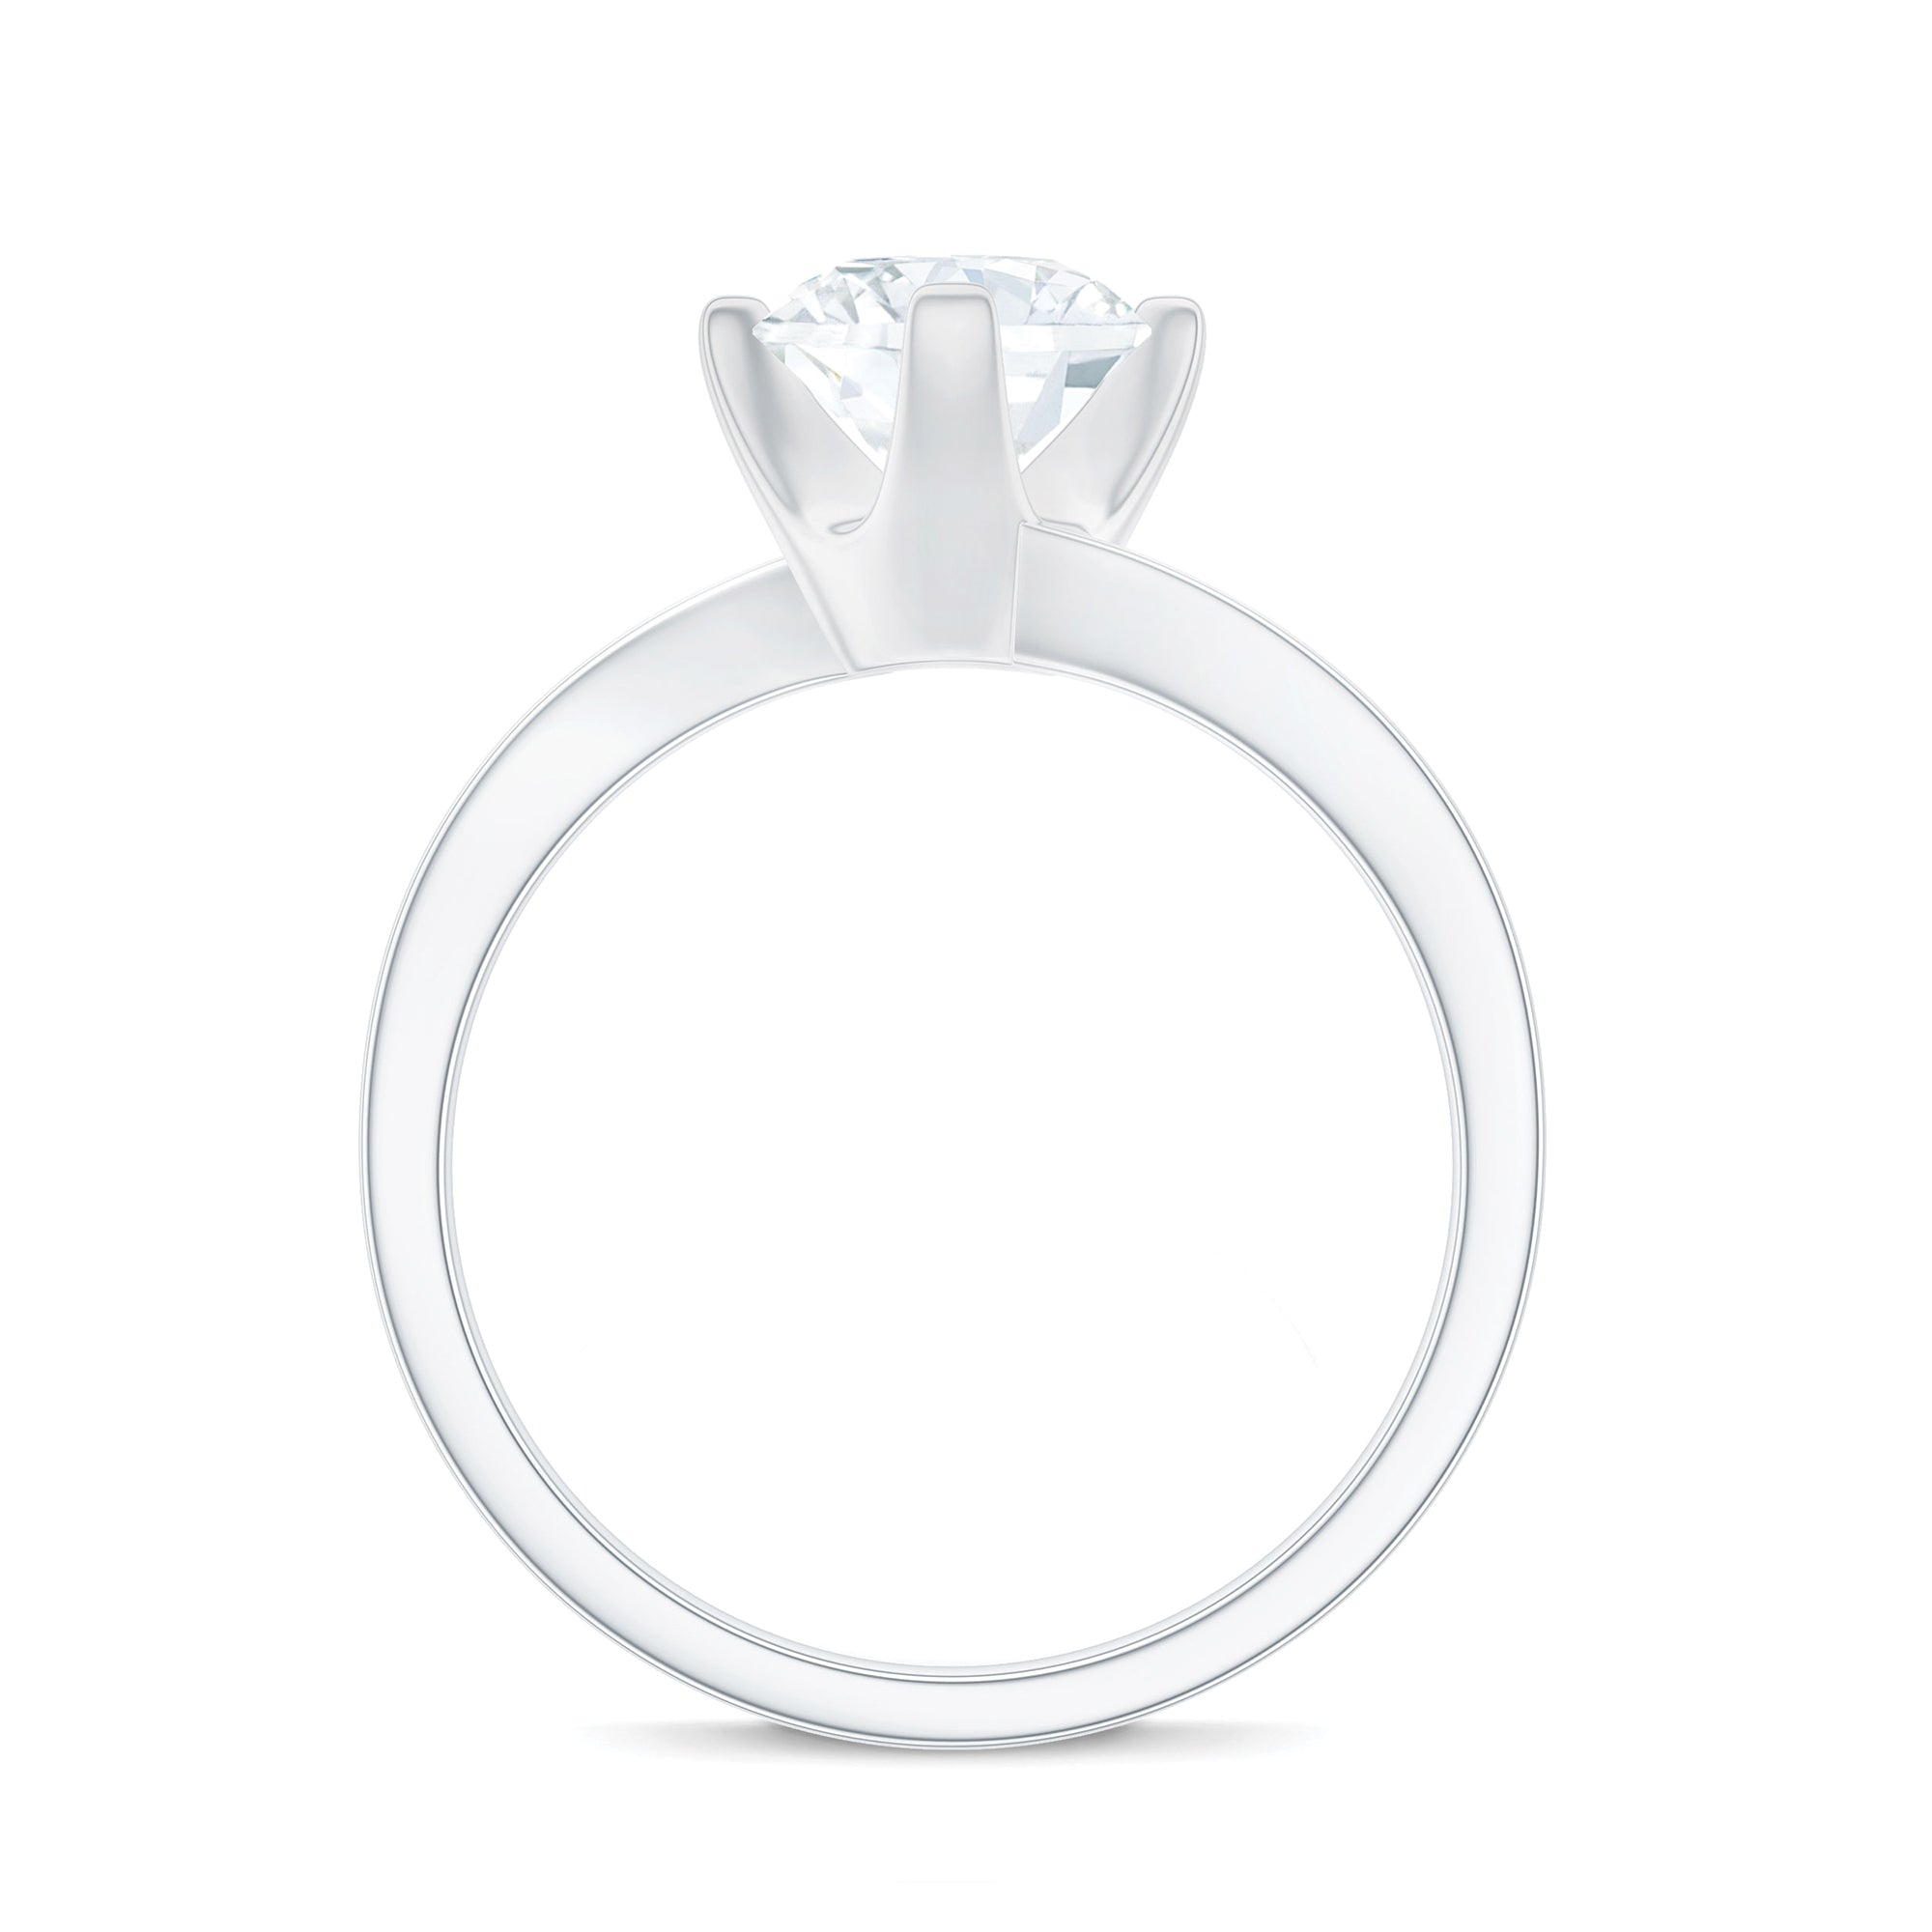 Round Cut Certified Moissanite Solitaire Bypass Gold Ring Moissanite - ( D-VS1 ) - Color and Clarity - Rosec Jewels